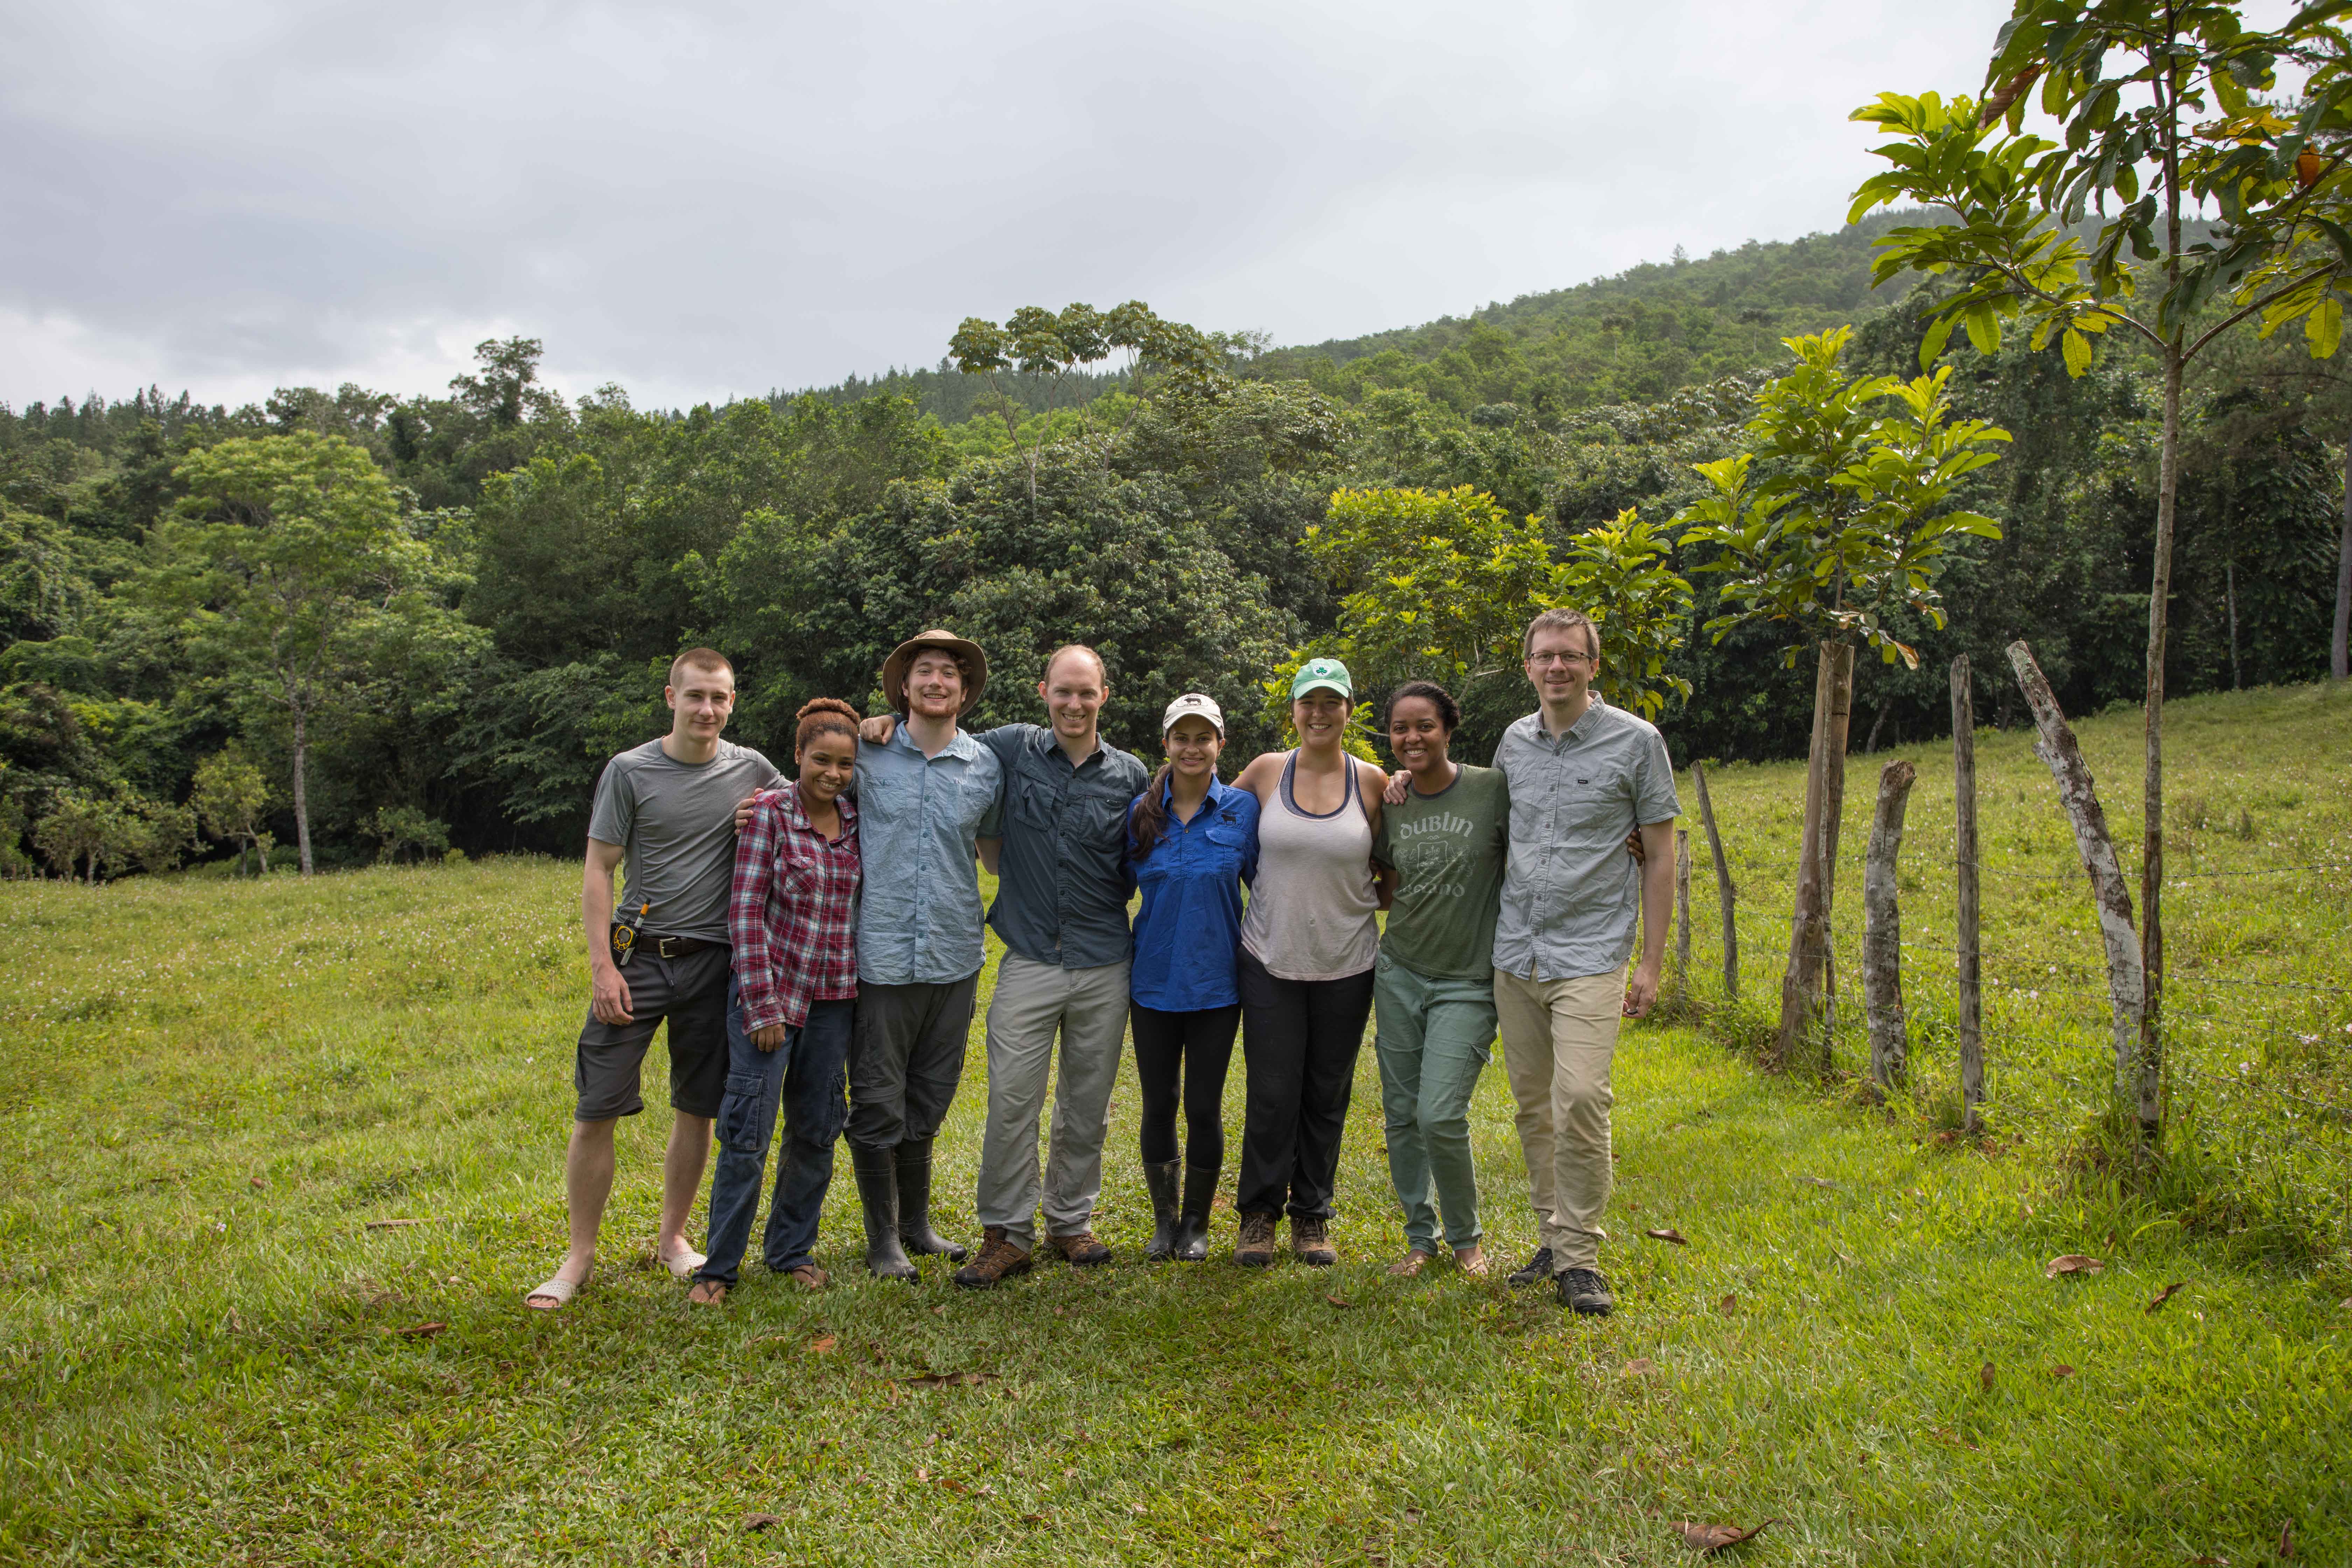 Eight people posing in a green field with trees in background